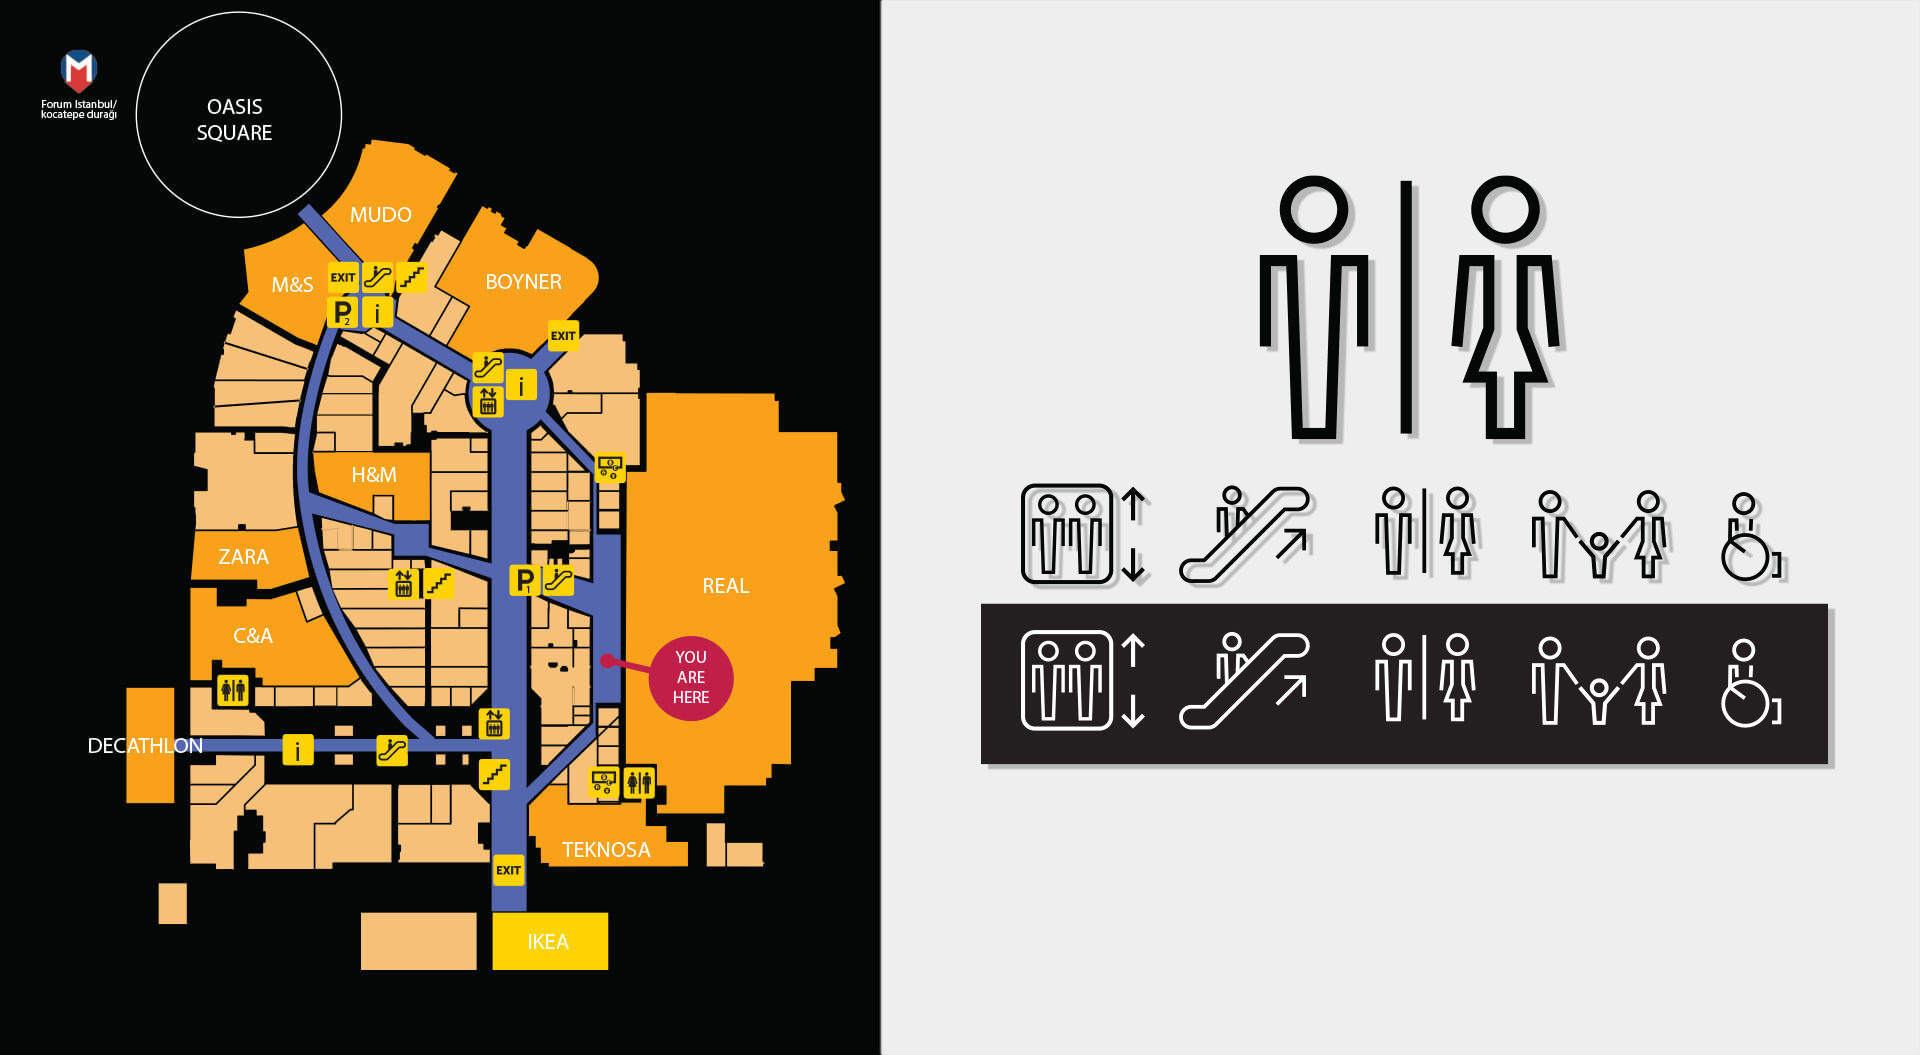 Forum Istanbul Shopping Mall navigation system and icon design